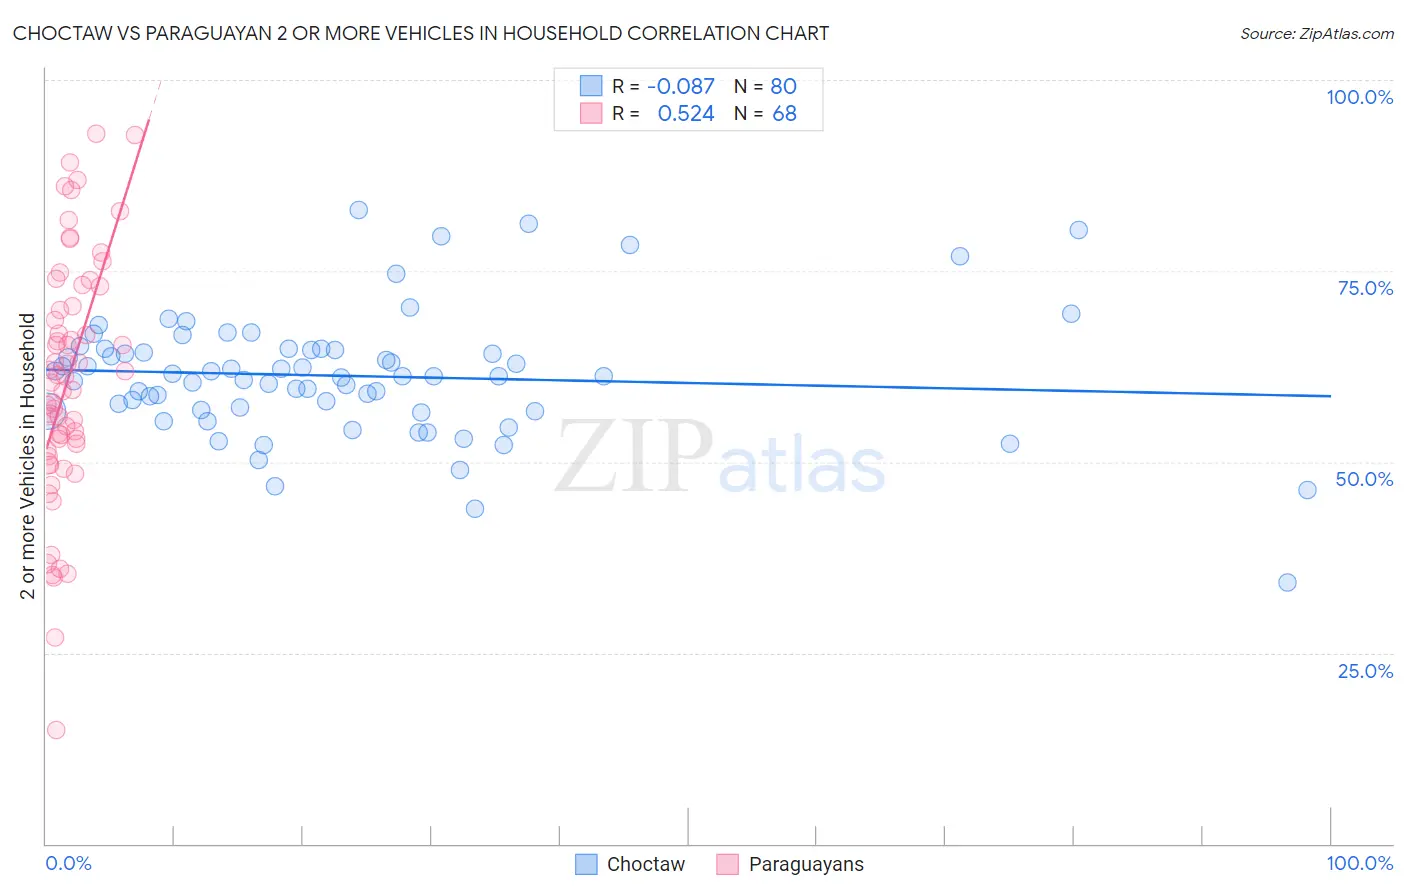 Choctaw vs Paraguayan 2 or more Vehicles in Household